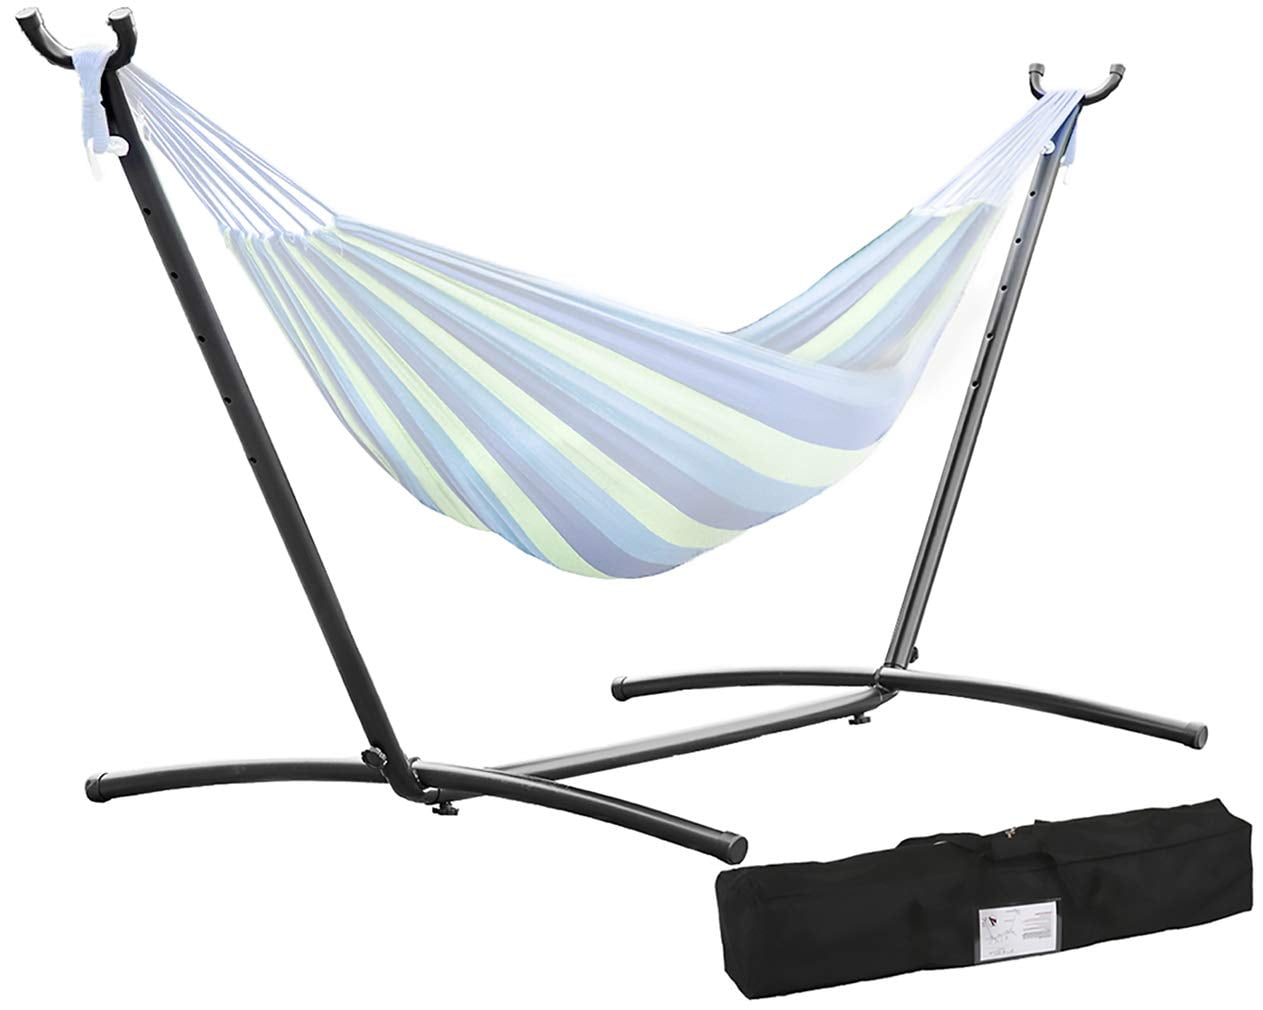 Double Hammock With Space Saving Steel Stand Patio W/ Portable Carrying Case